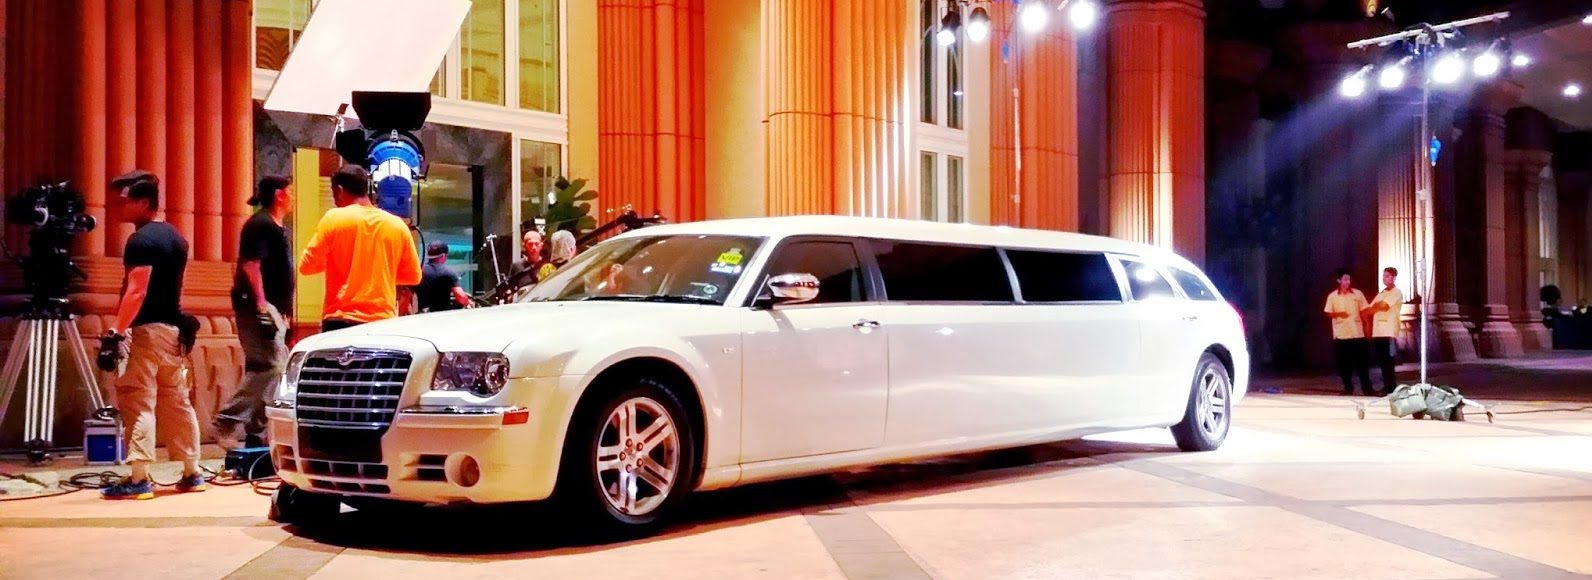 5 FUN THINGS TO DO IN A LIMO RIDE